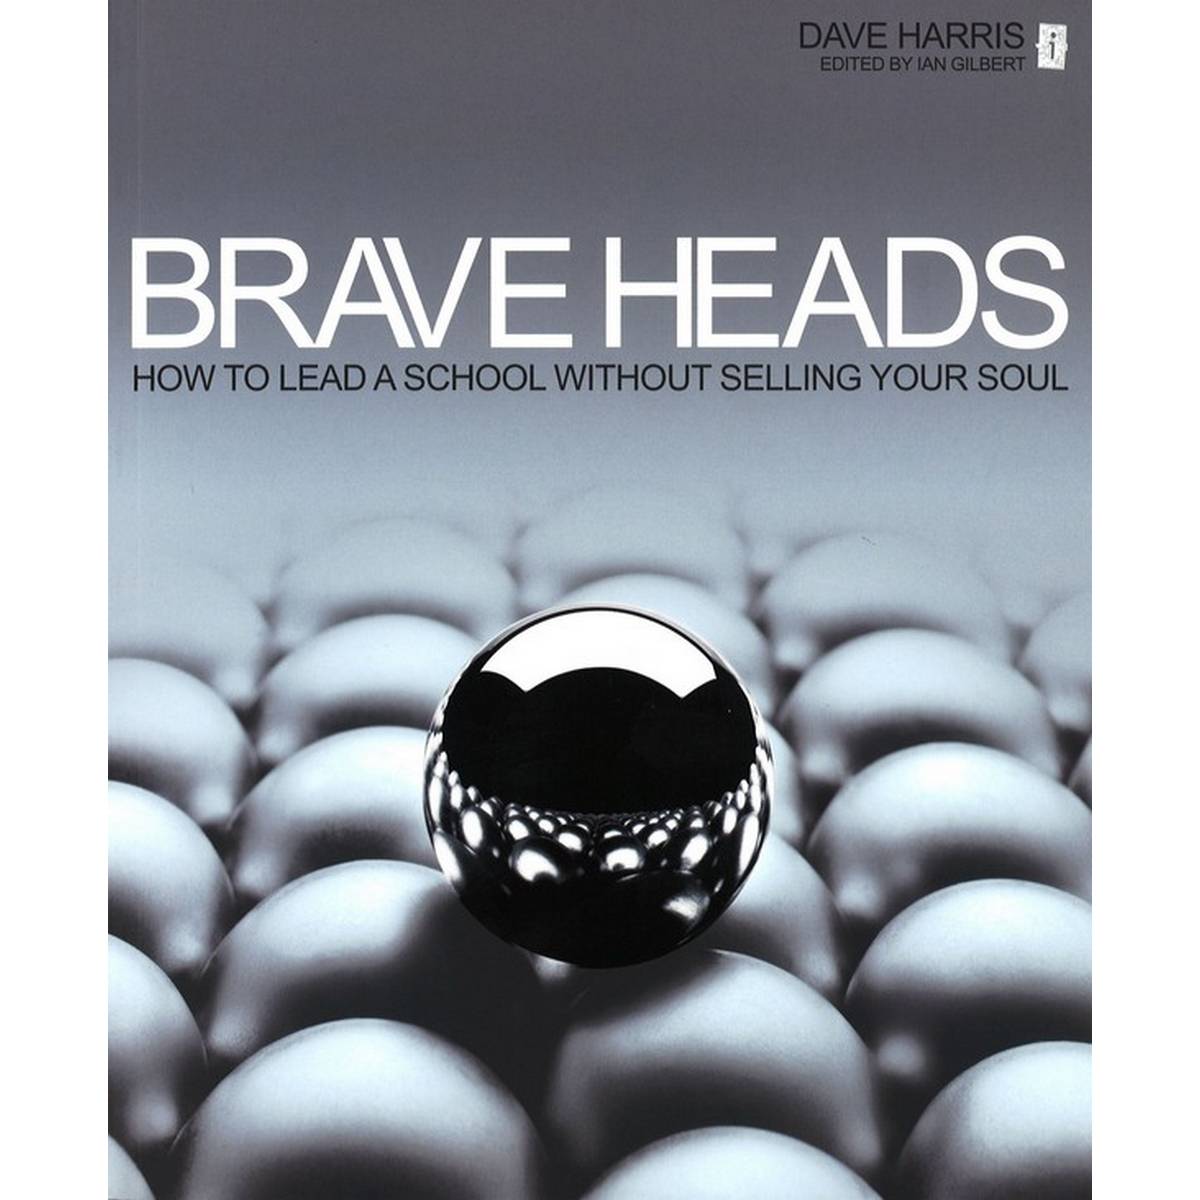 Brave Heads: How To Lead A School Without Selling Your Soul